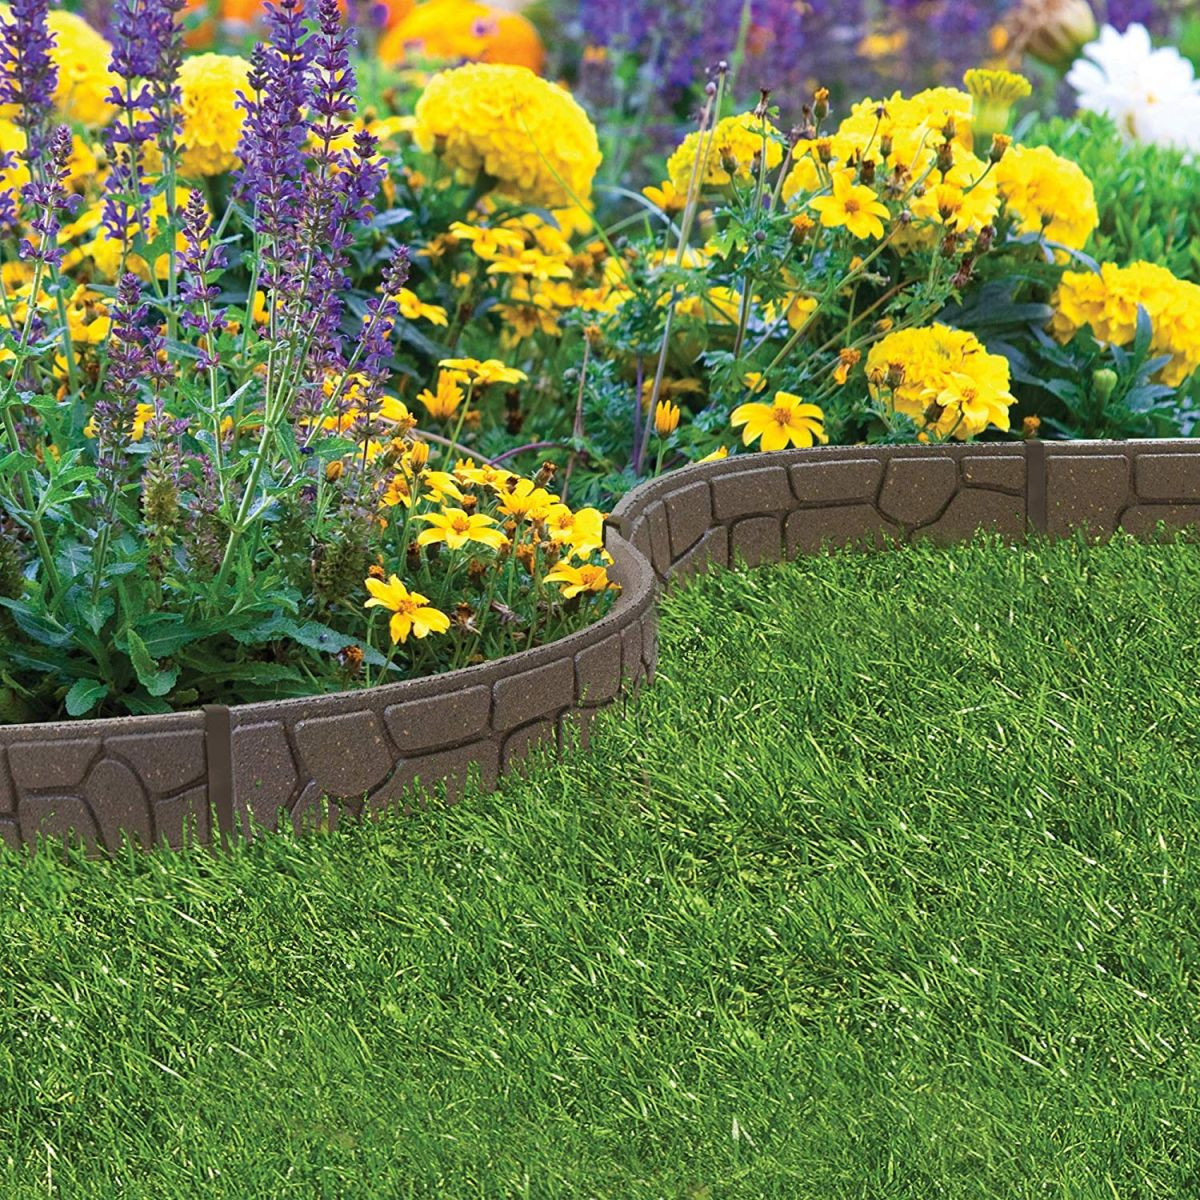 Patio Border Landscaping
 Lawn edging 8 ideas to keep your borders neat